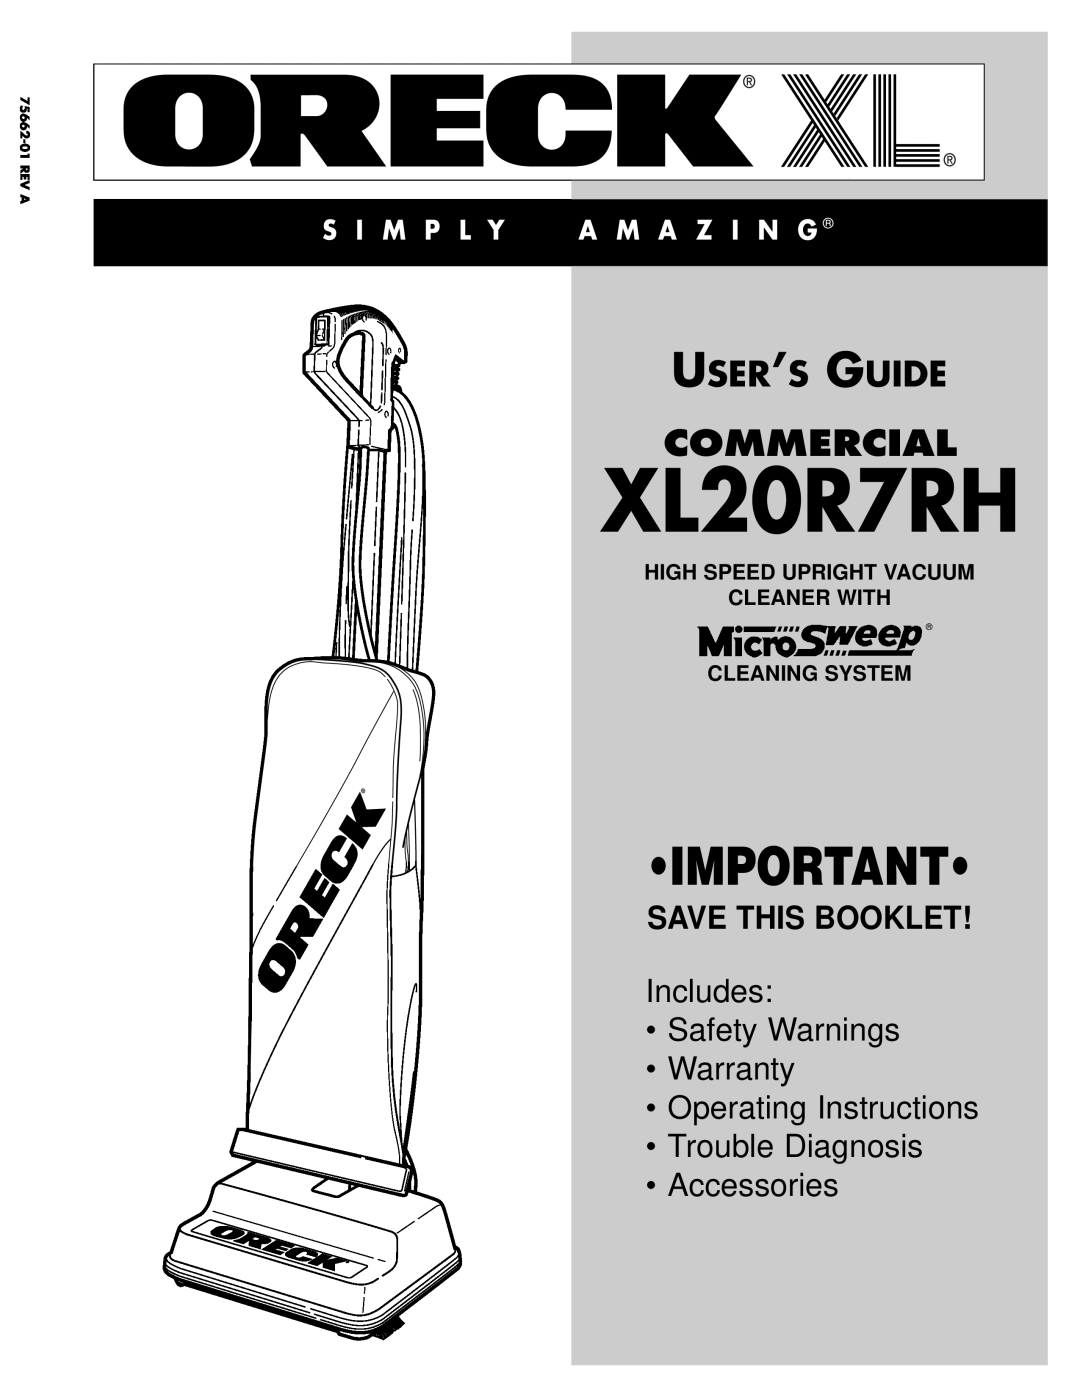 Oreck XL20R7RH warranty Save This Booklet, High Speed Upright Vacuum Cleaner With, Cleaning System, Commercial 